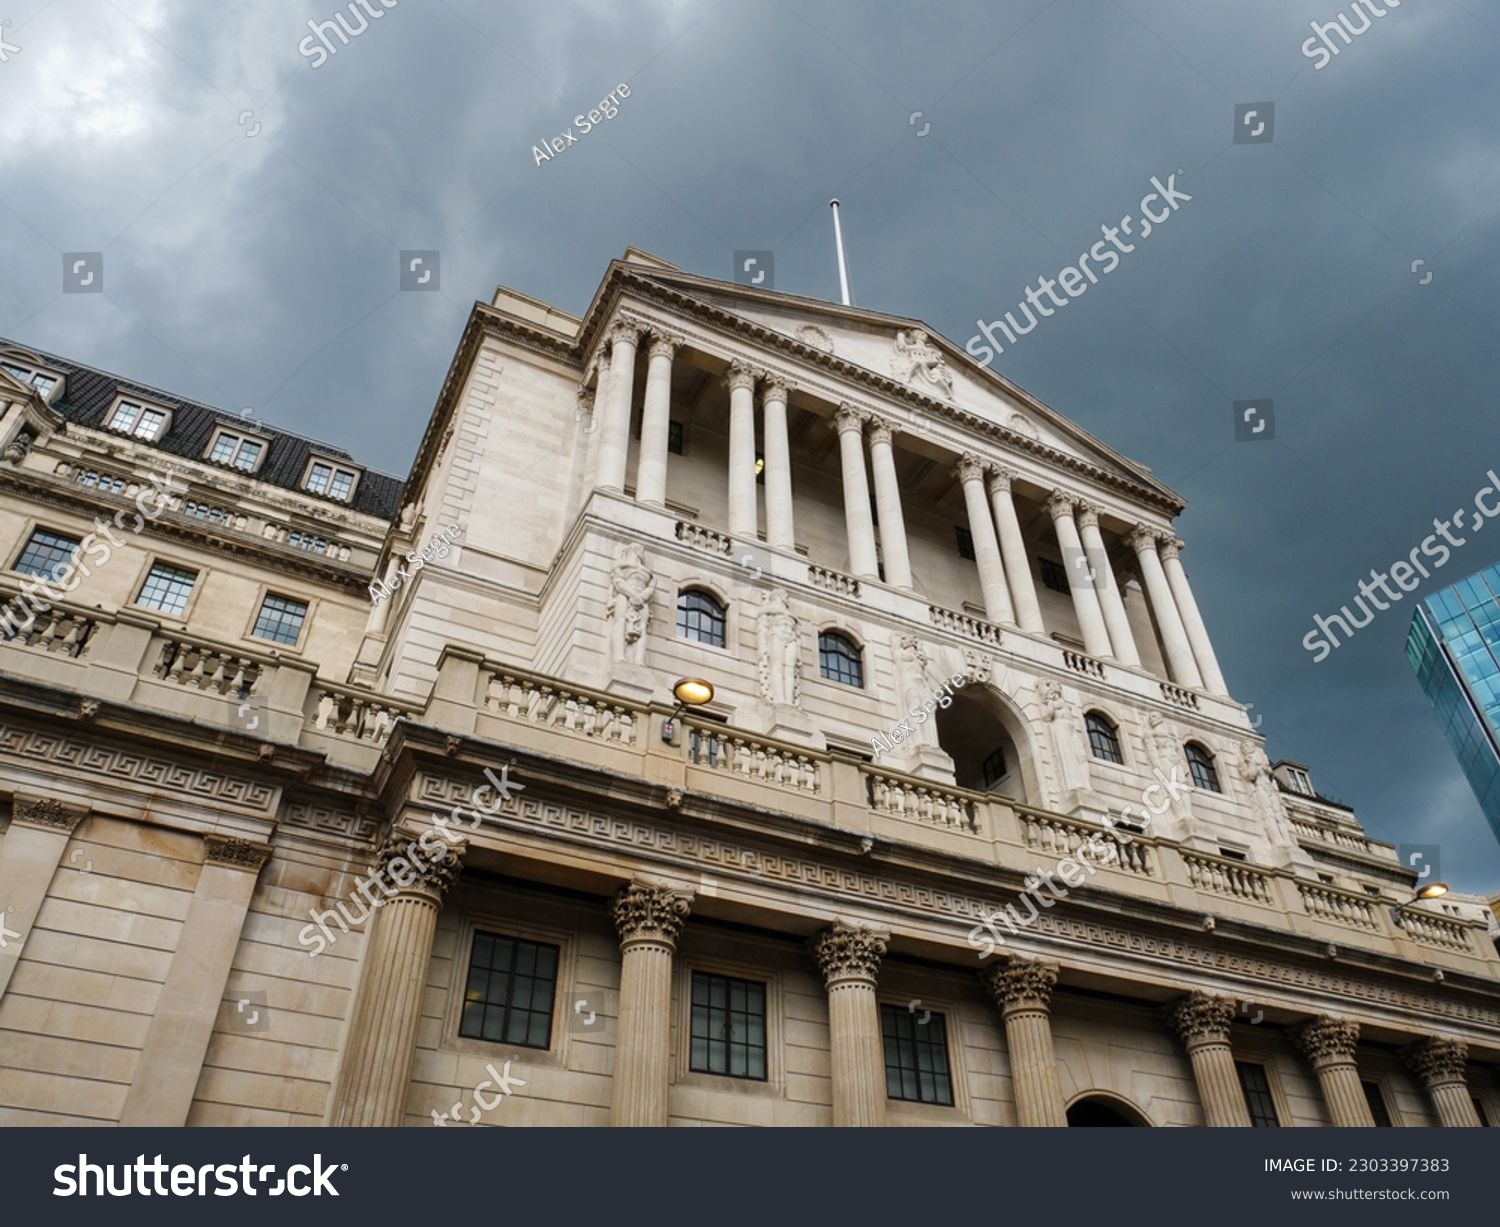 The Bank of England under dark stormy clouds, London, UK #2303397383